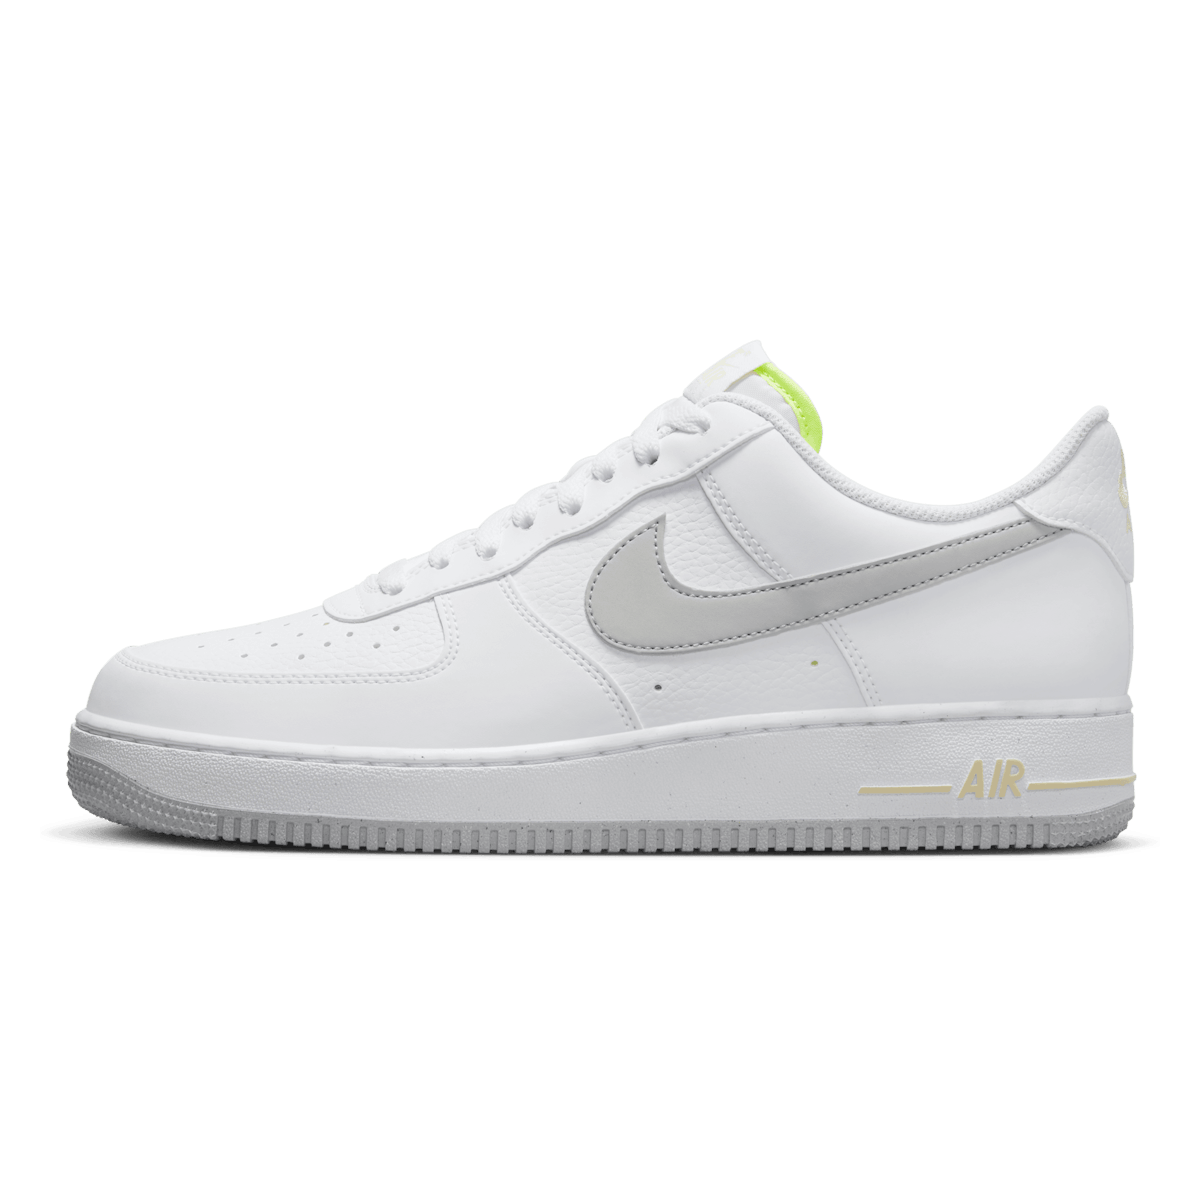 Nike Air Force 1 '07 Next Nature "White Grey Volt"